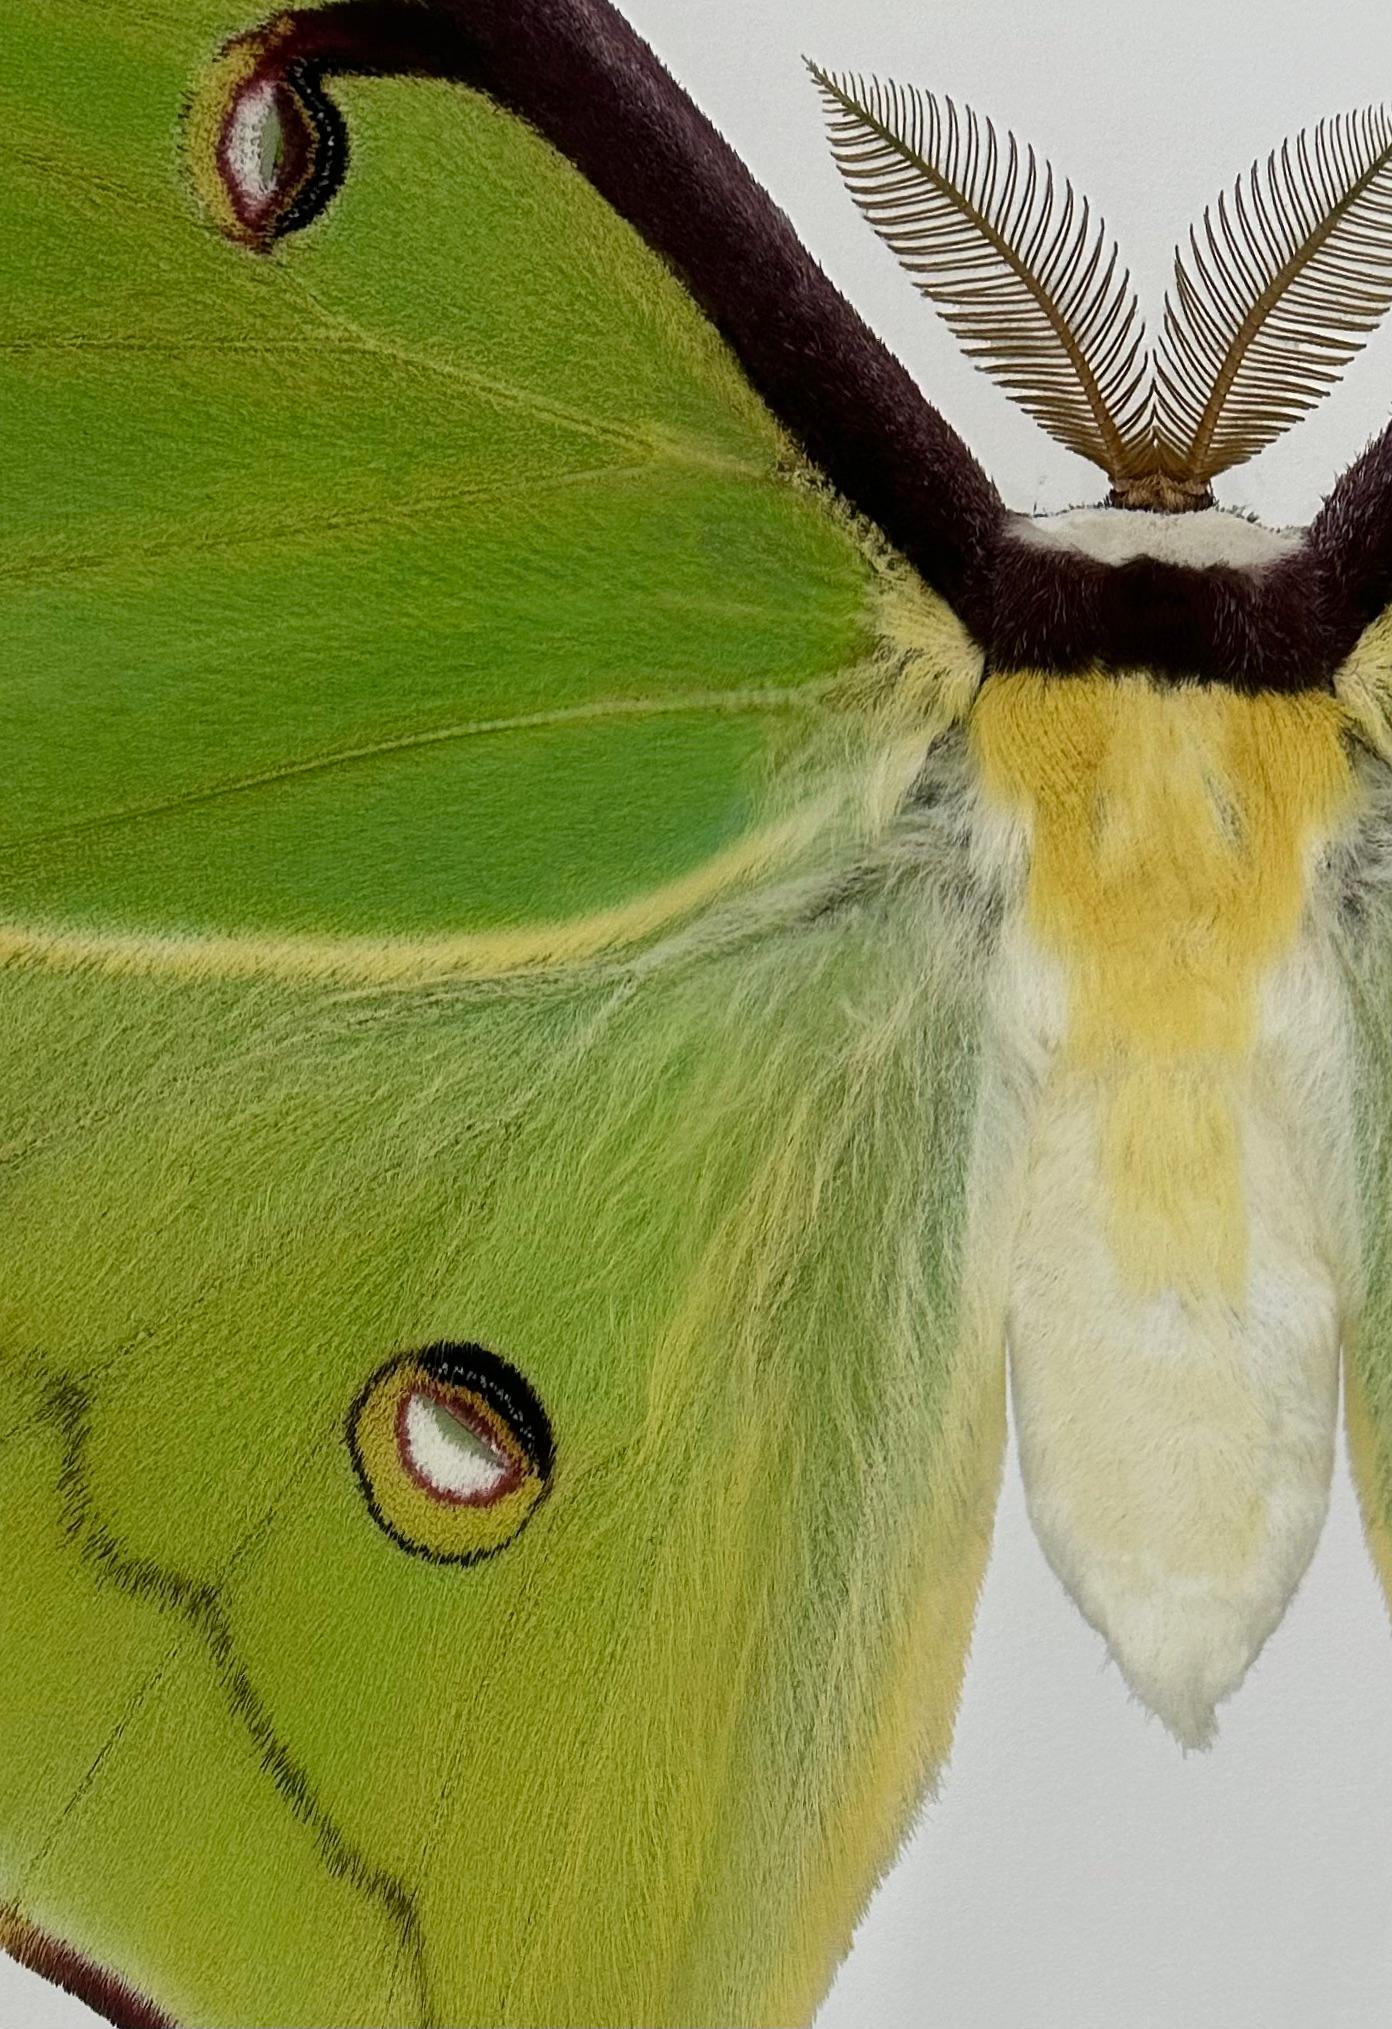 Actias Luna, Green, Yellow, Brown Moth Insect Nature Photograph For Sale 4